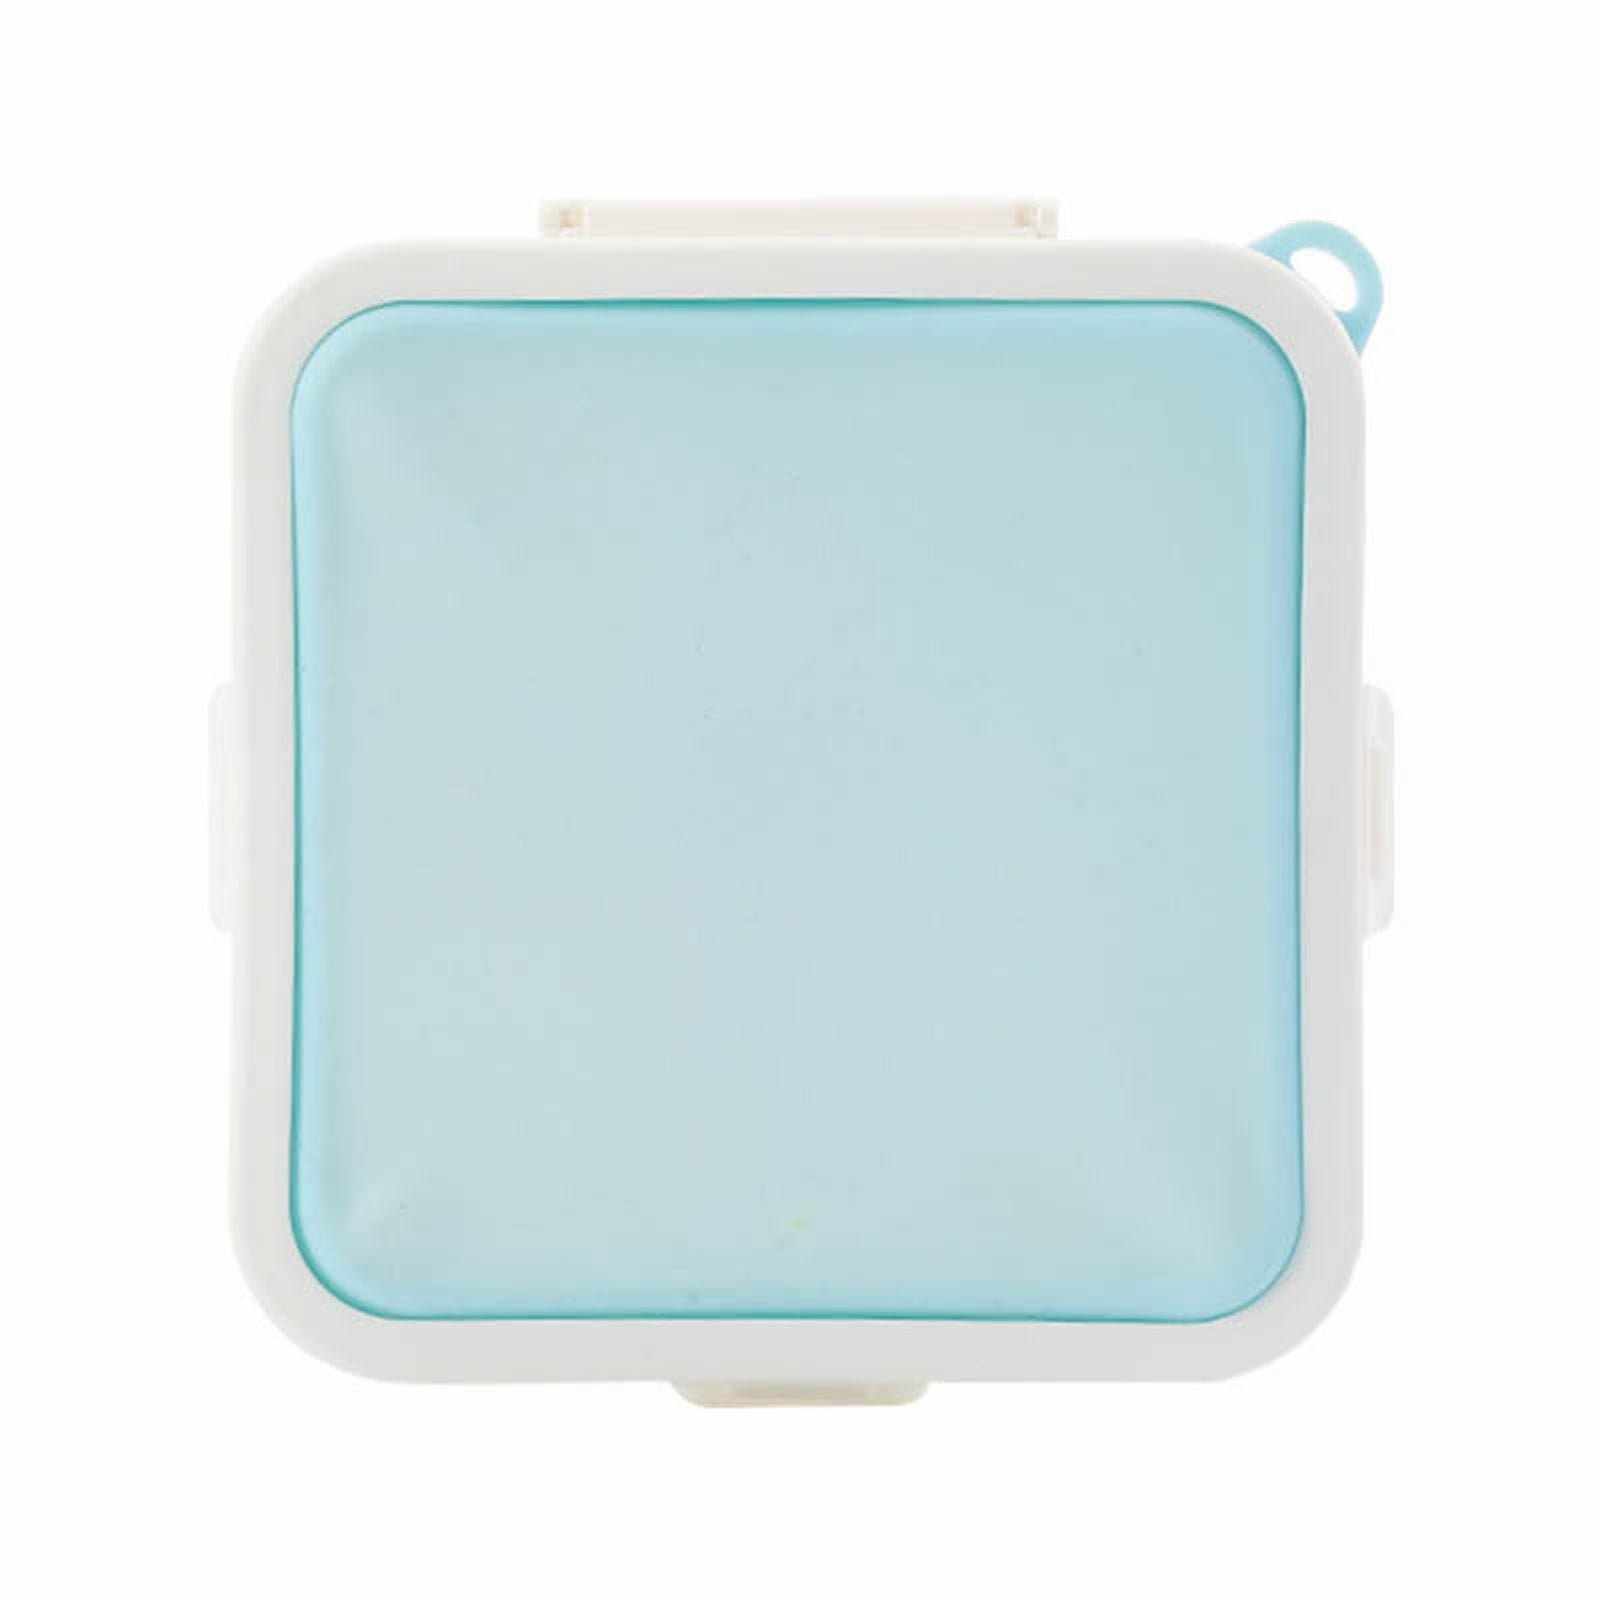 Pjtewawe Food Storage Sandwich Containers Sandwich Box Food Storage Shape  Holder For Lunch Boxes Bread Sandwich For Kids Adults Prep Microwave  Dishwasher 